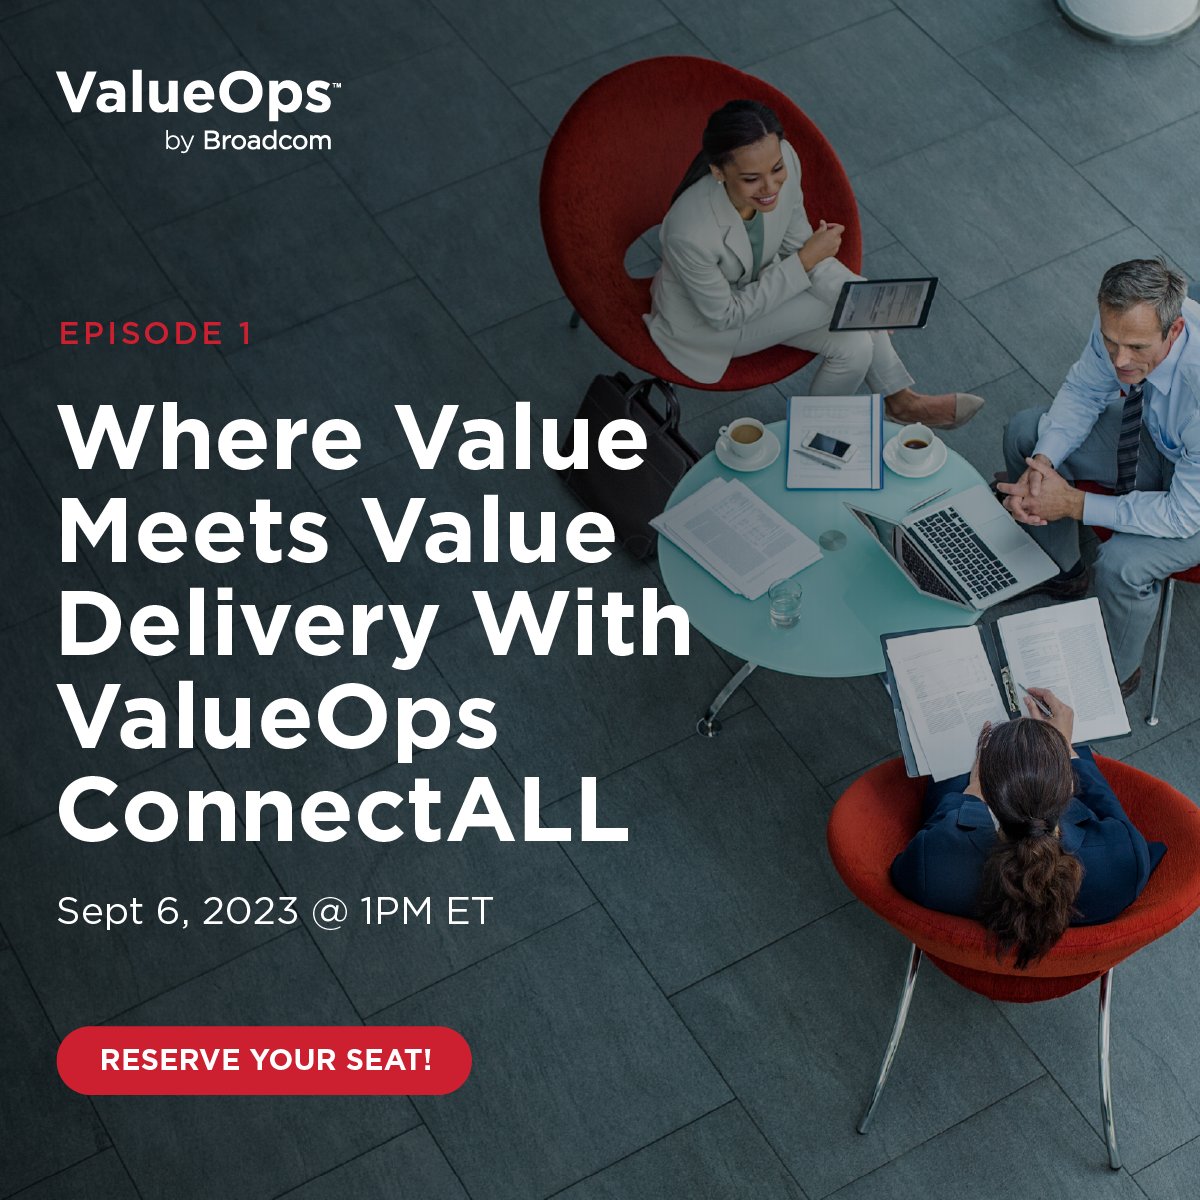 Learn how to streamline value delivery, optimize collaboration, & gain a competitive edge next week at our ValueOps ConnectALL interactive webinar. Break down silos and gain insights from @Broadcom experts @Lance Knight & @Francois Cattoen #ValueOpsVSM  bit.ly/44ztYiK